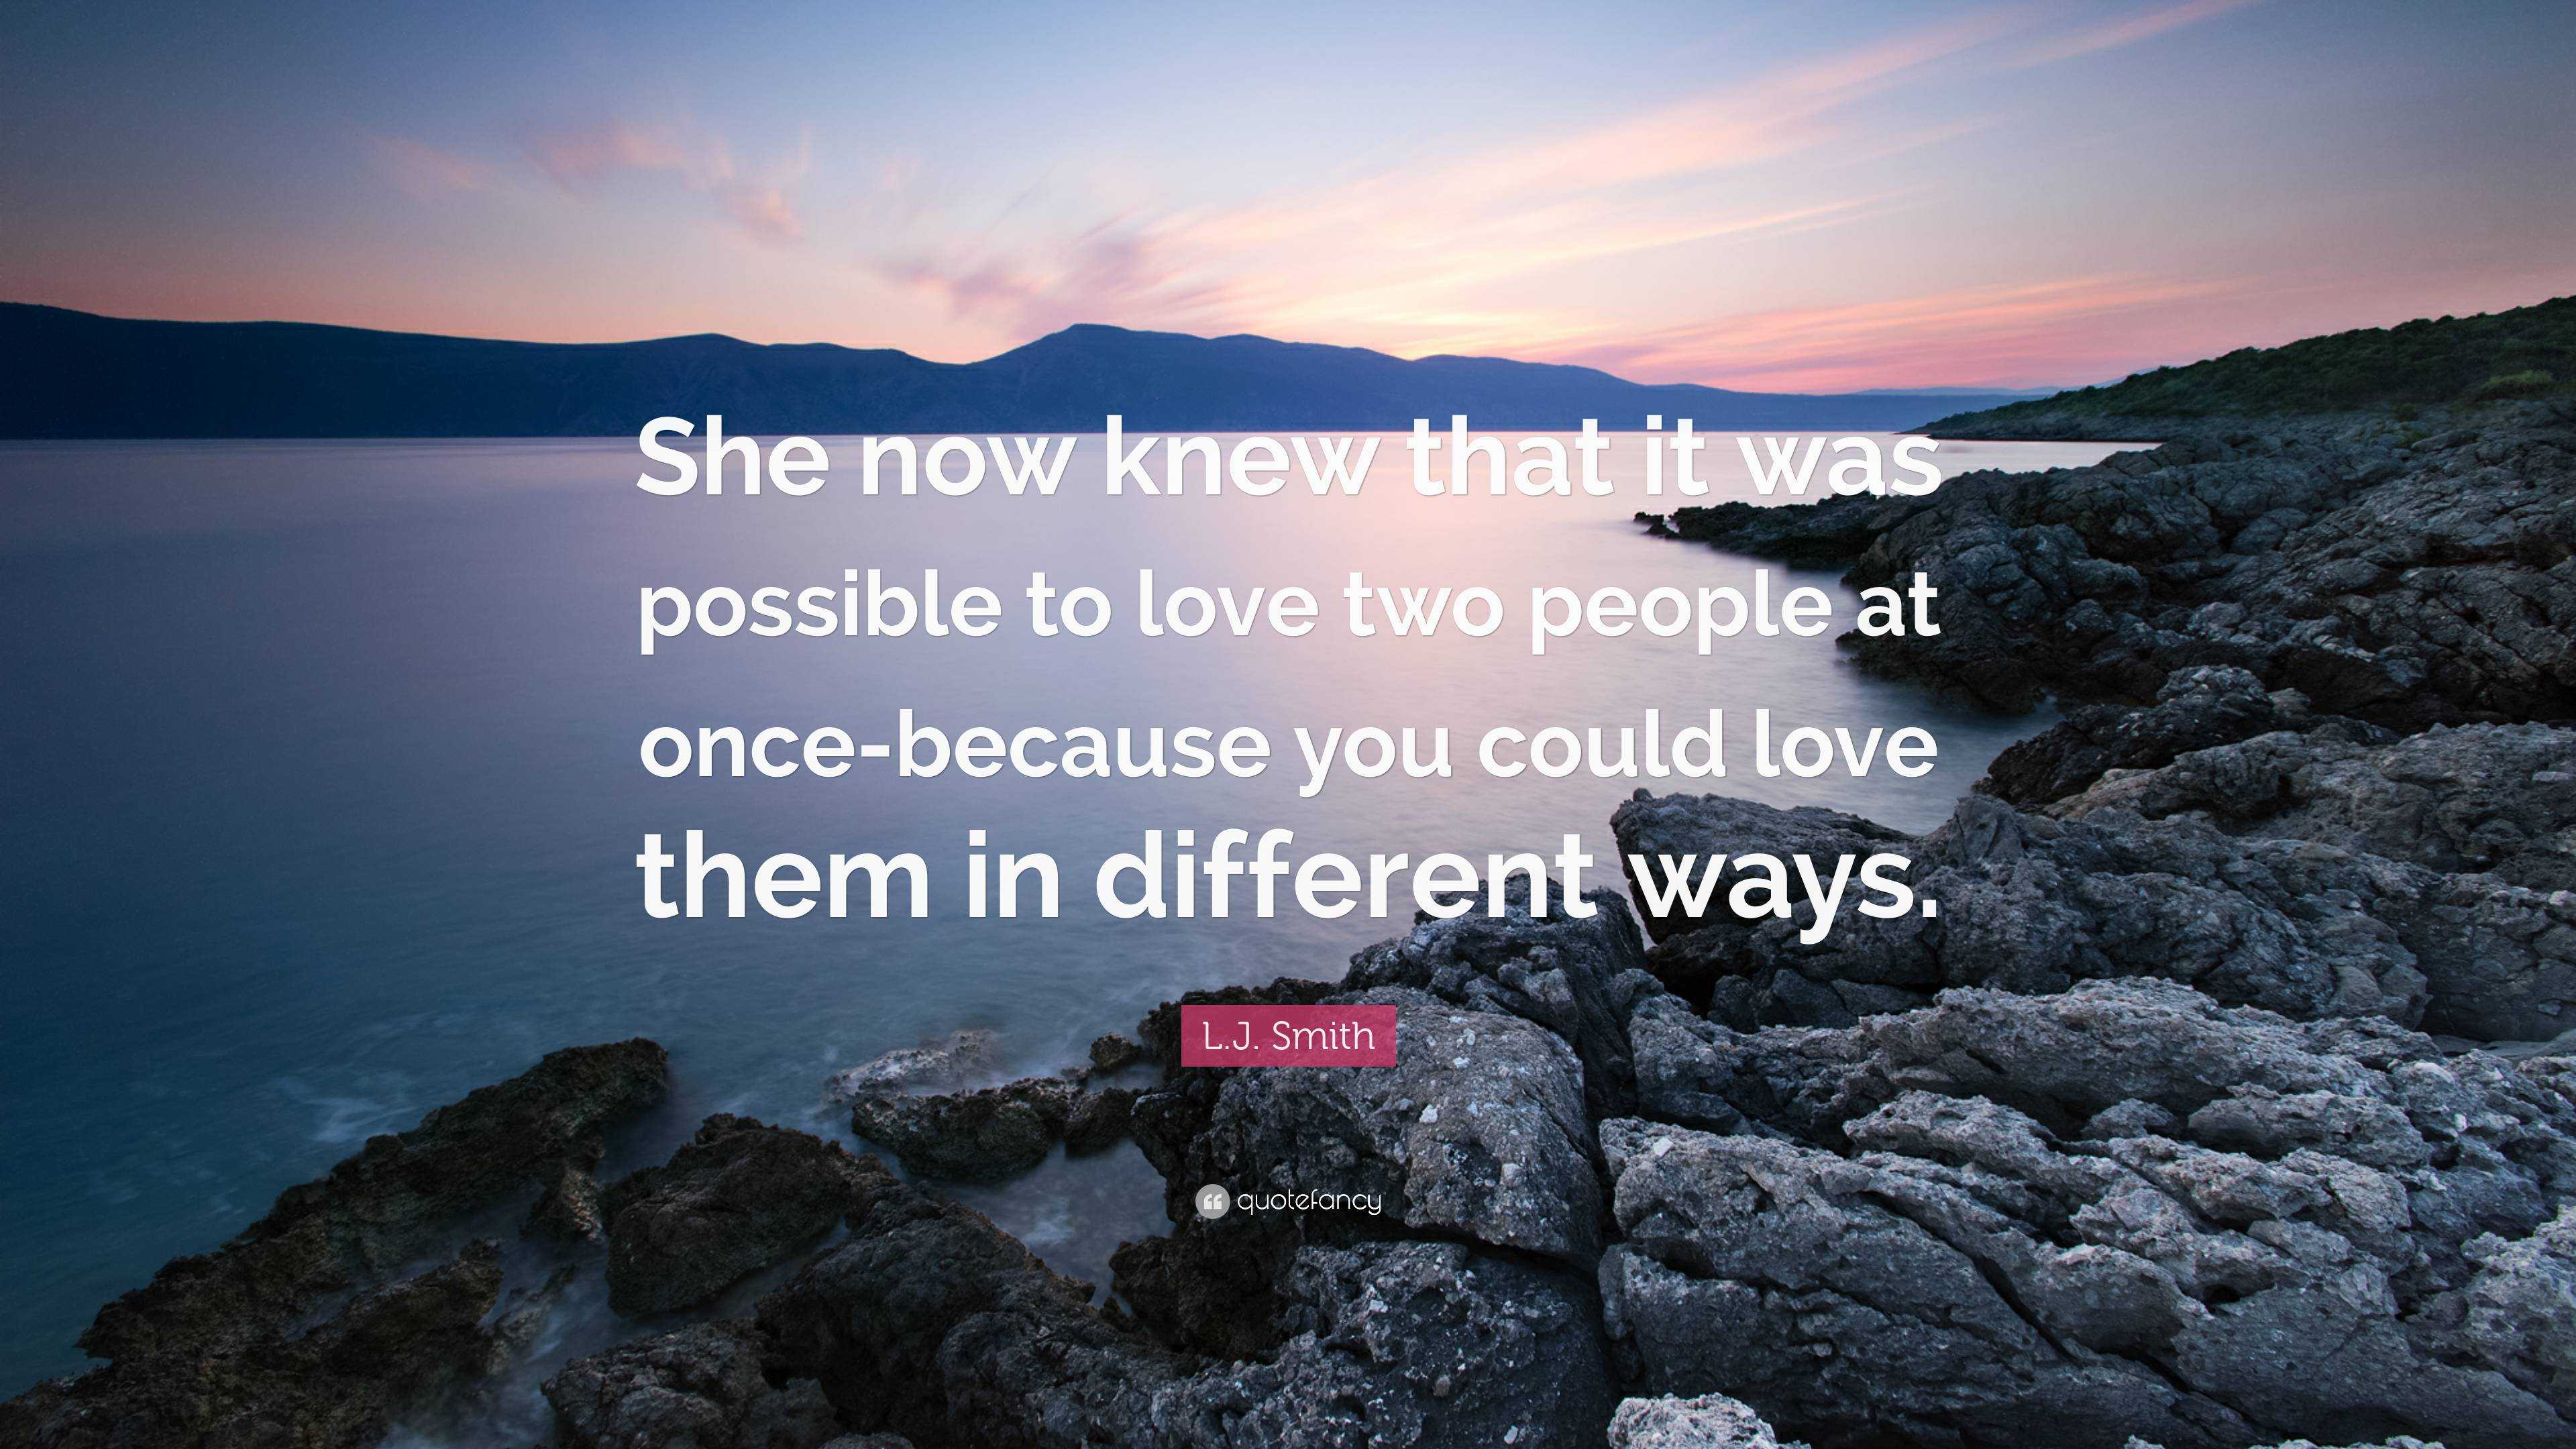 L.J. Smith Quote: “She now knew that it was possible to love two people ...